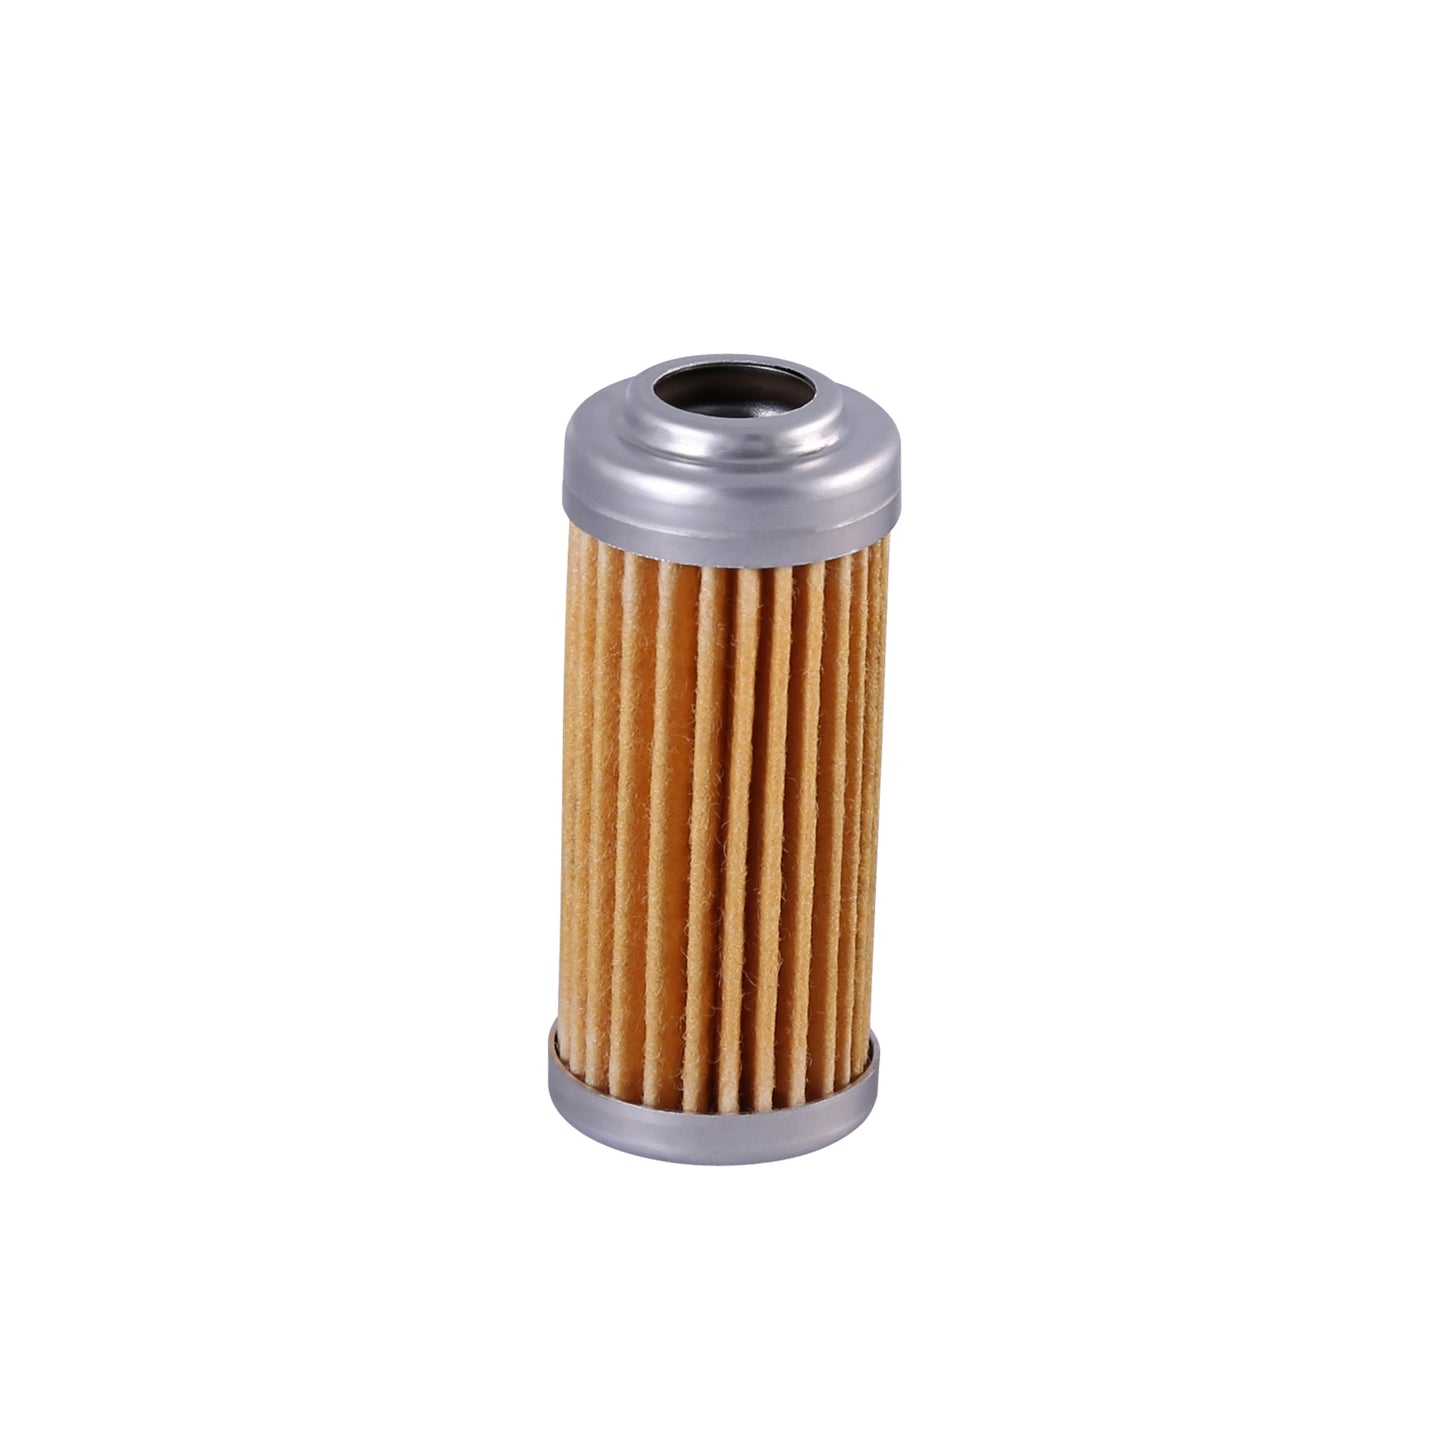 40 Micron Element for 3/8 NPT Filters